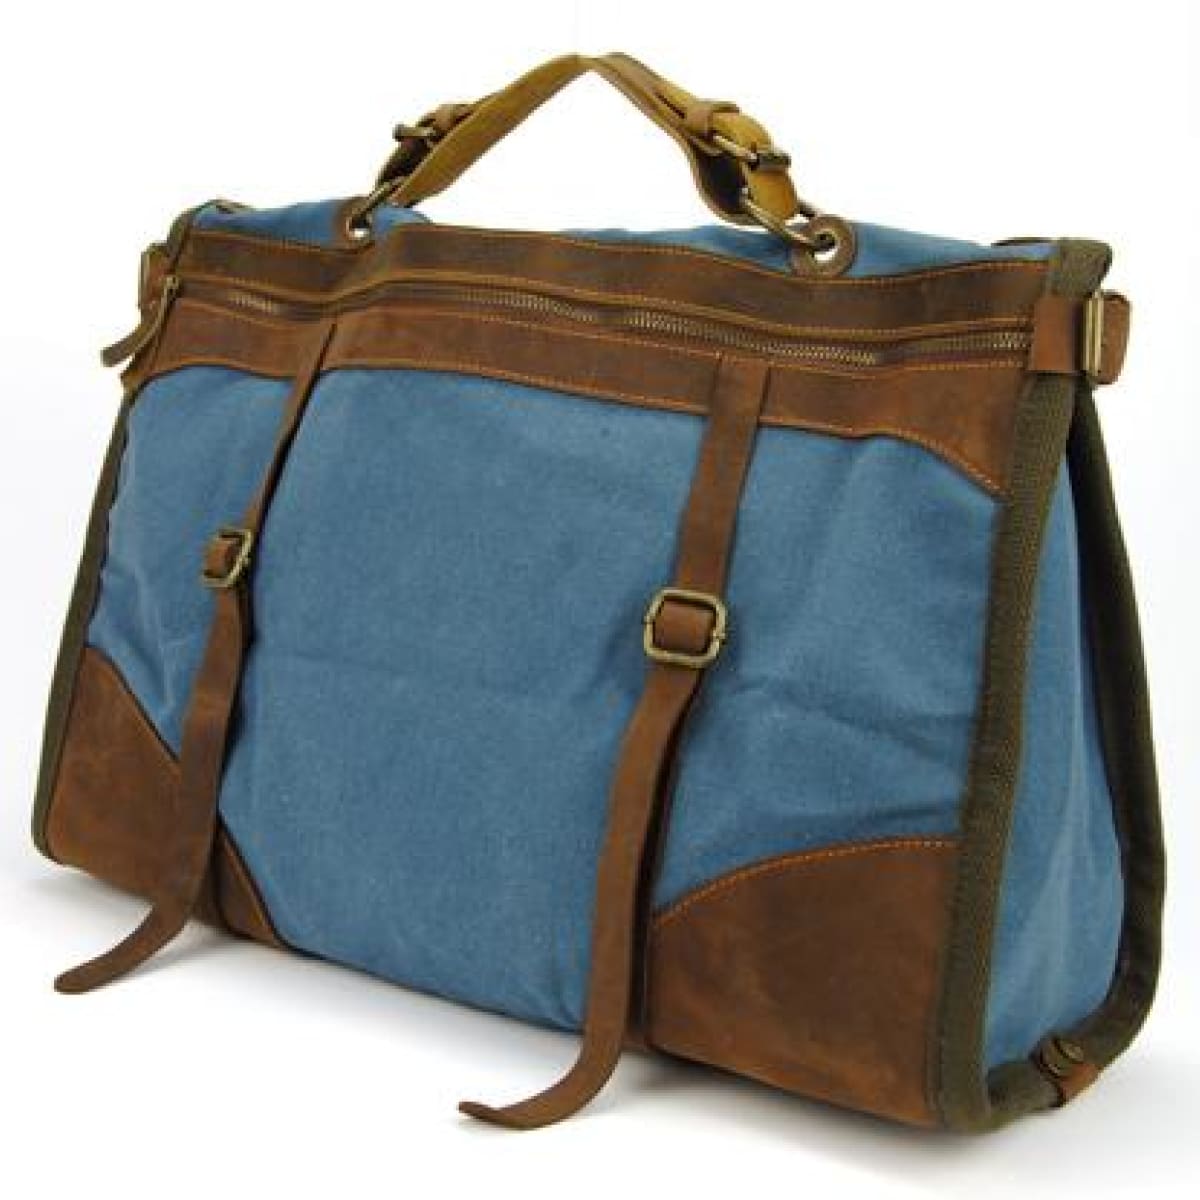 M1 Military Canvas + Leather Weekender Duffle Bag